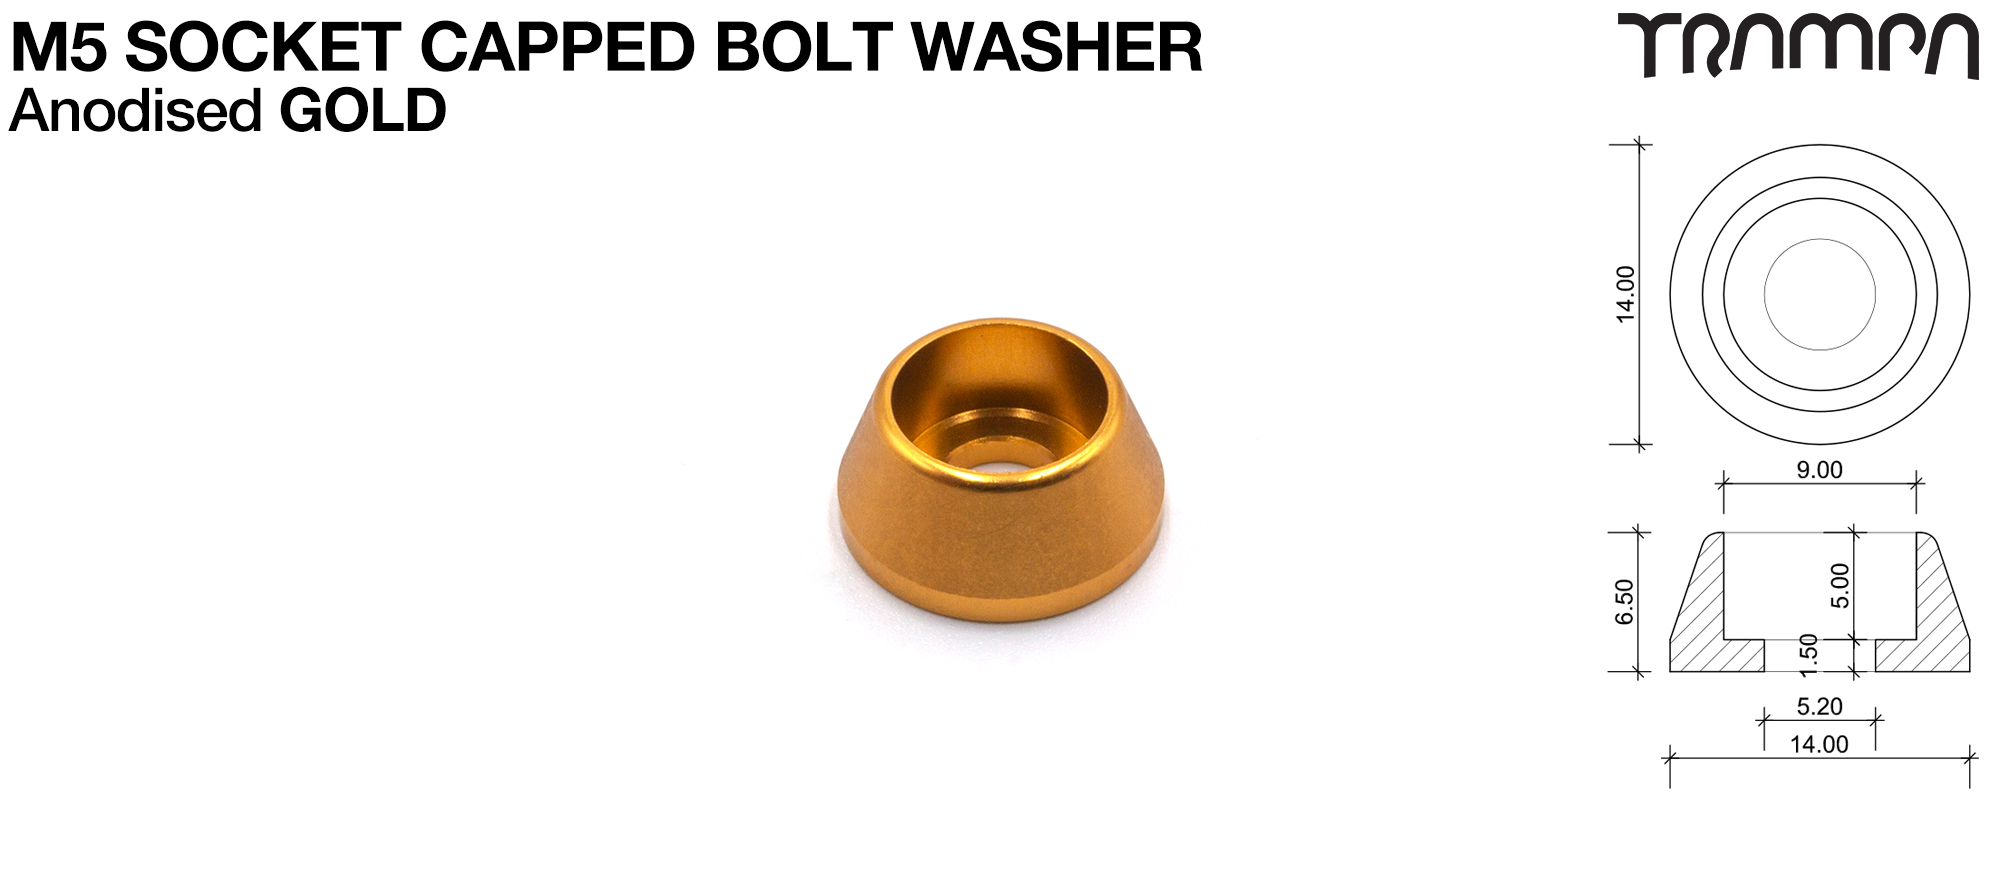 M5 Socket Capped Washer B Anodised - GOLD